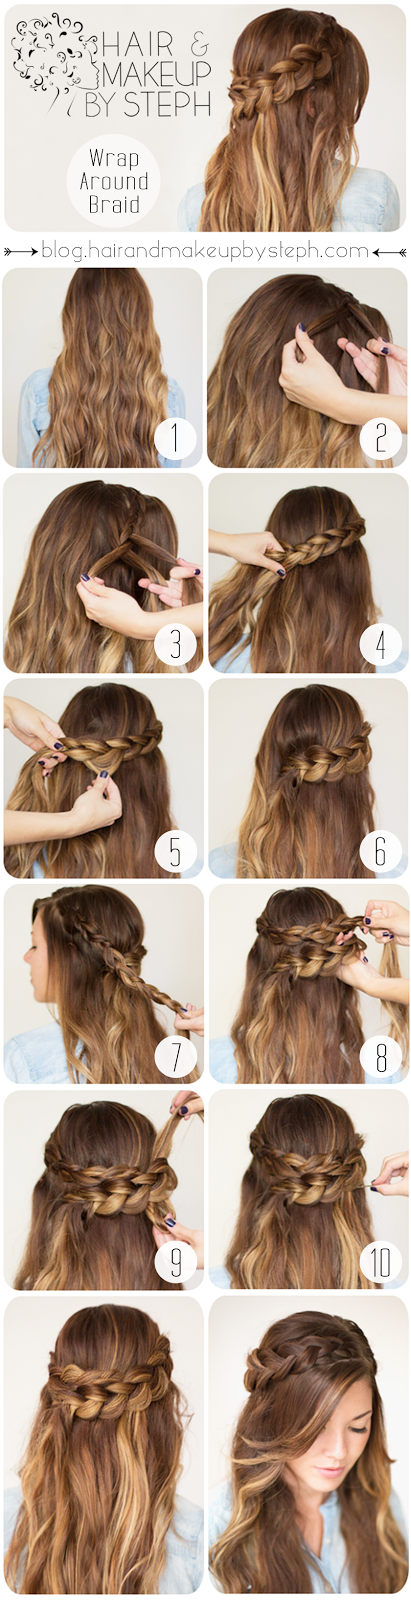 18 Great Hairstyle Ideas and Tutorials for Perfect Holiday Look (3)